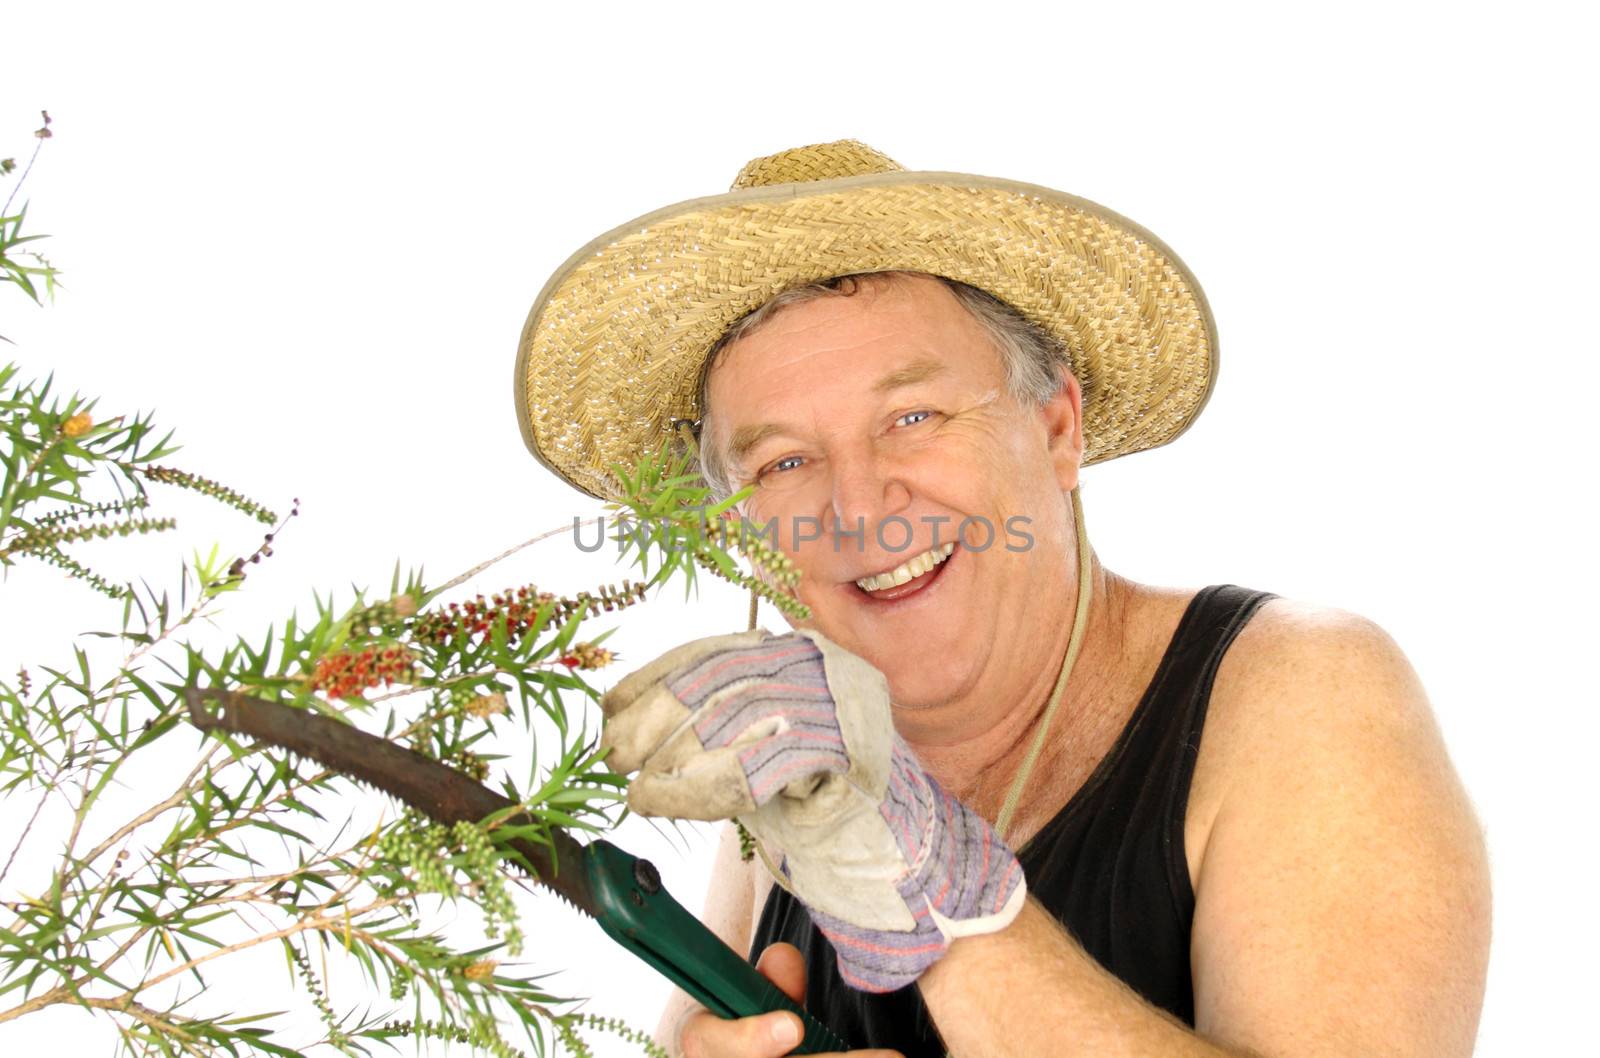 Middle aged gardener pruning a shrub with a garden saw.